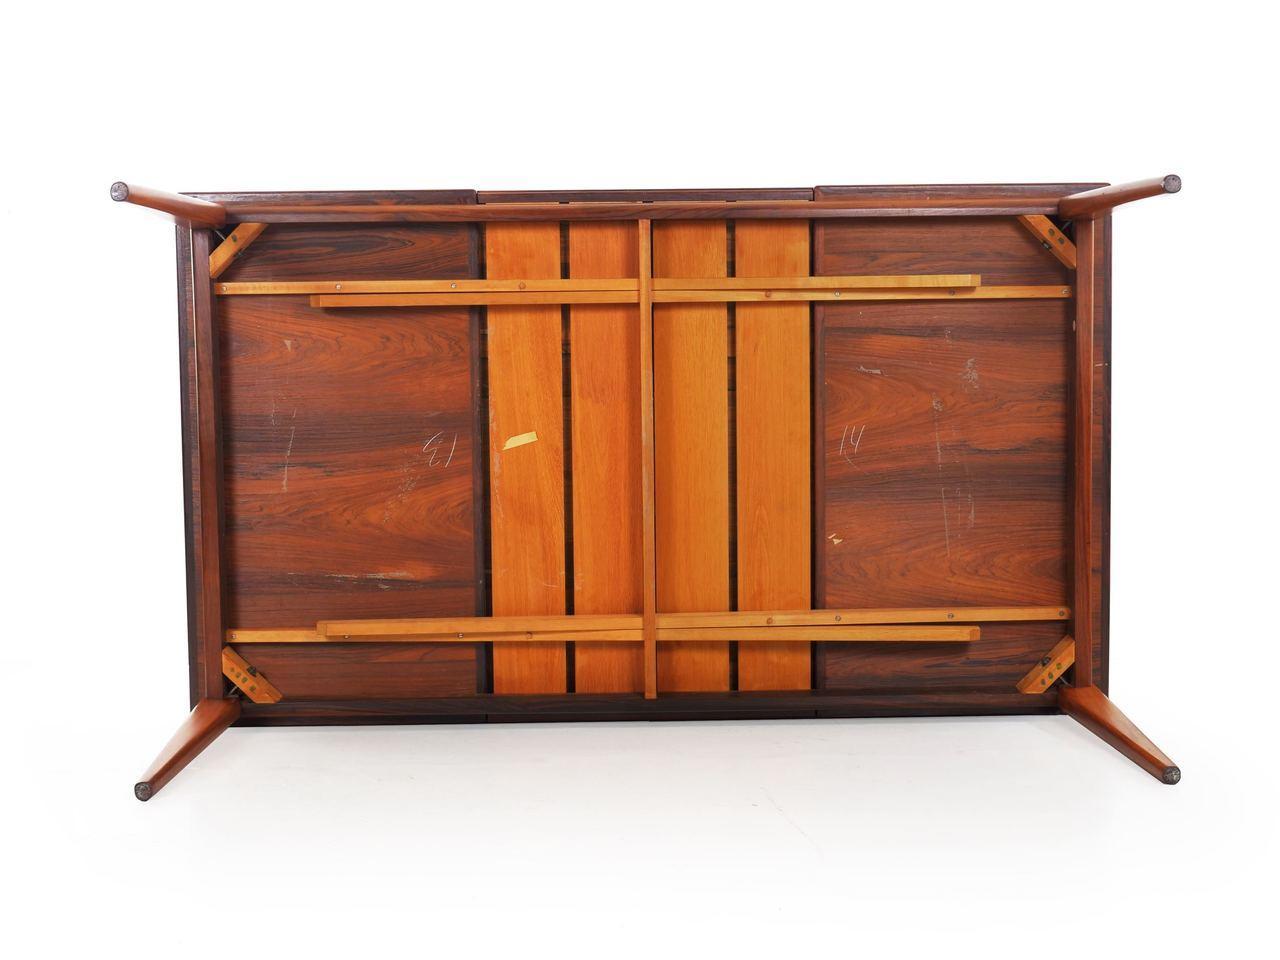 Danish Mid-Century Modern Rosewood Dining Table by Niels Møller, Model No. 254 6